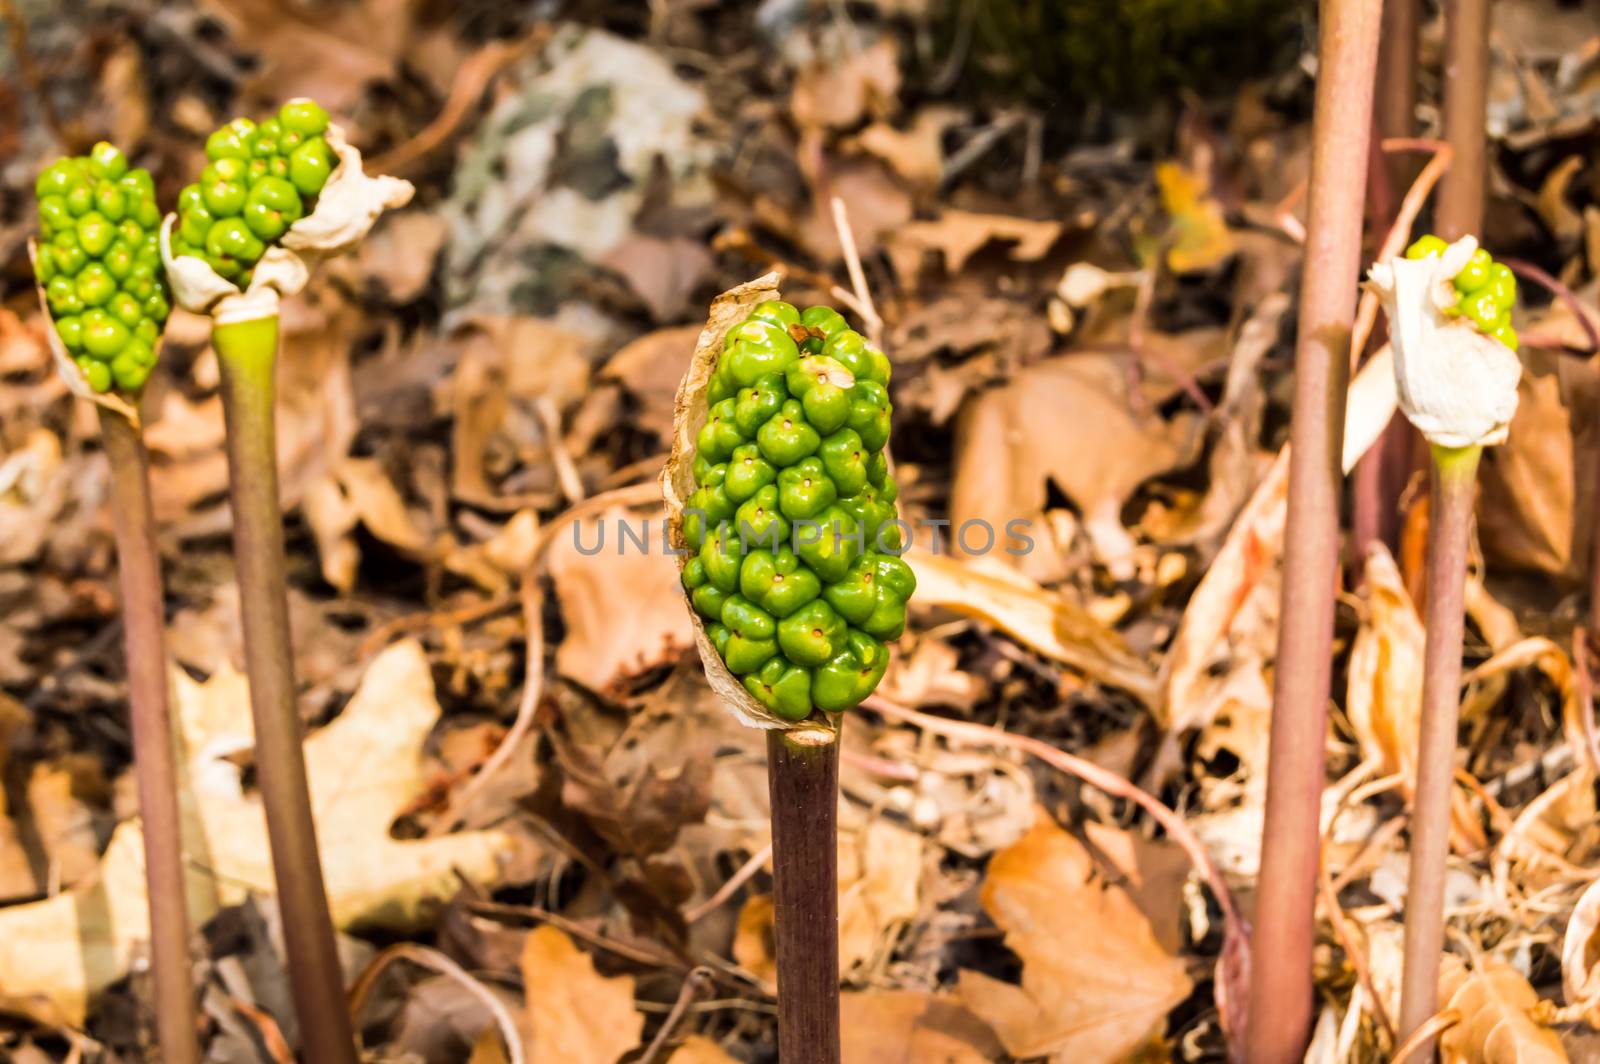 Jack-in-the-pulpit Fruit, Arisaema triphyllum. Spring wild flowe by Philou1000